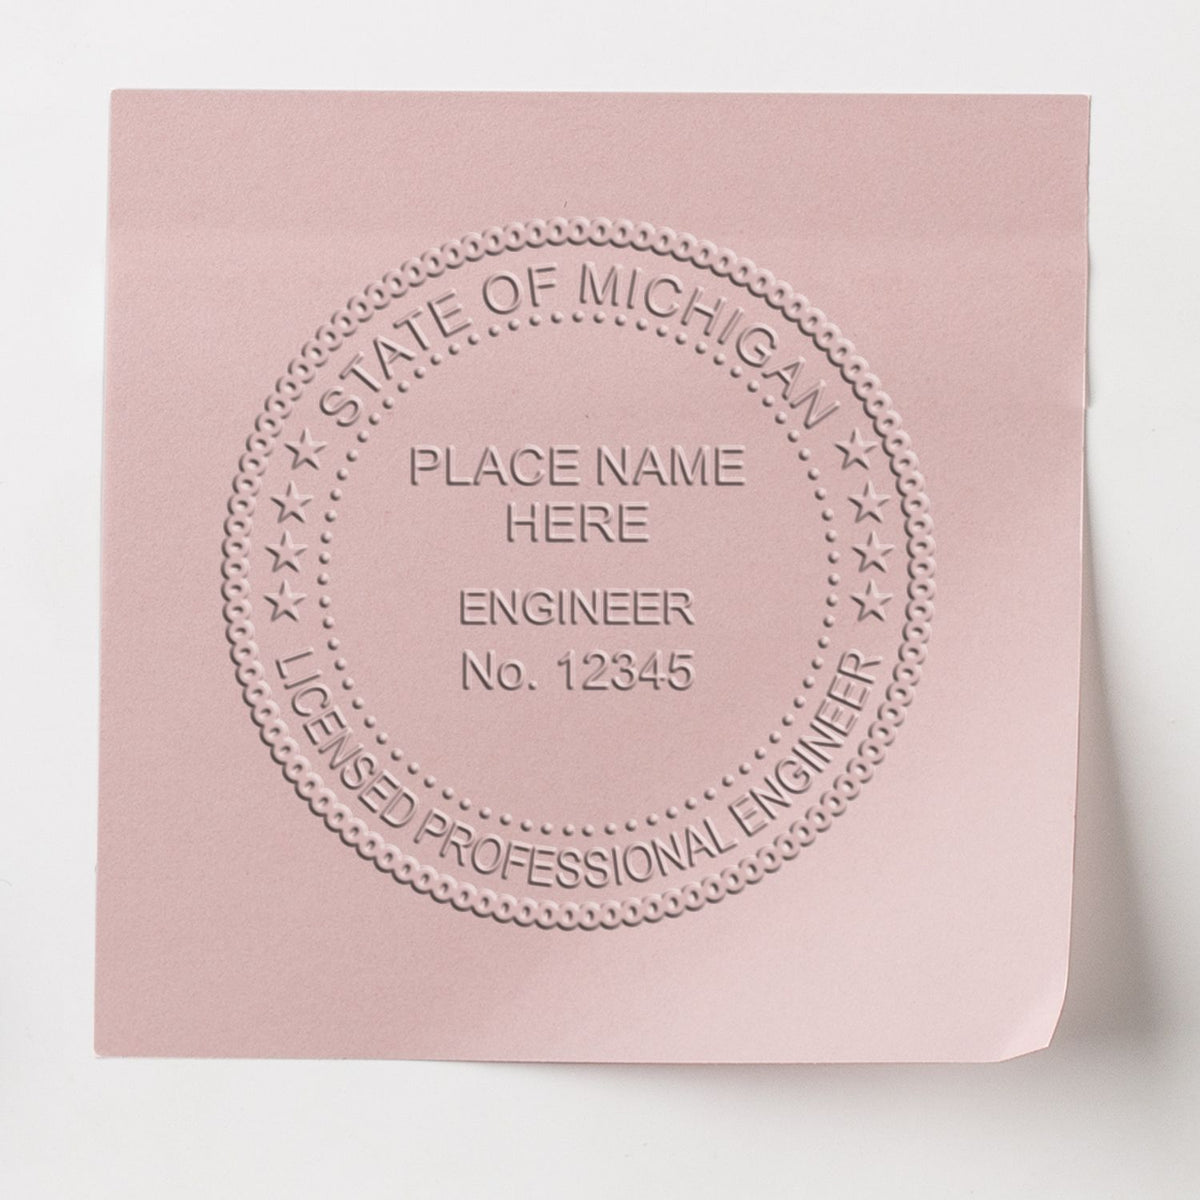 A photograph of the Heavy Duty Cast Iron Michigan Engineer Seal Embosser stamp impression reveals a vivid, professional image of the on paper.